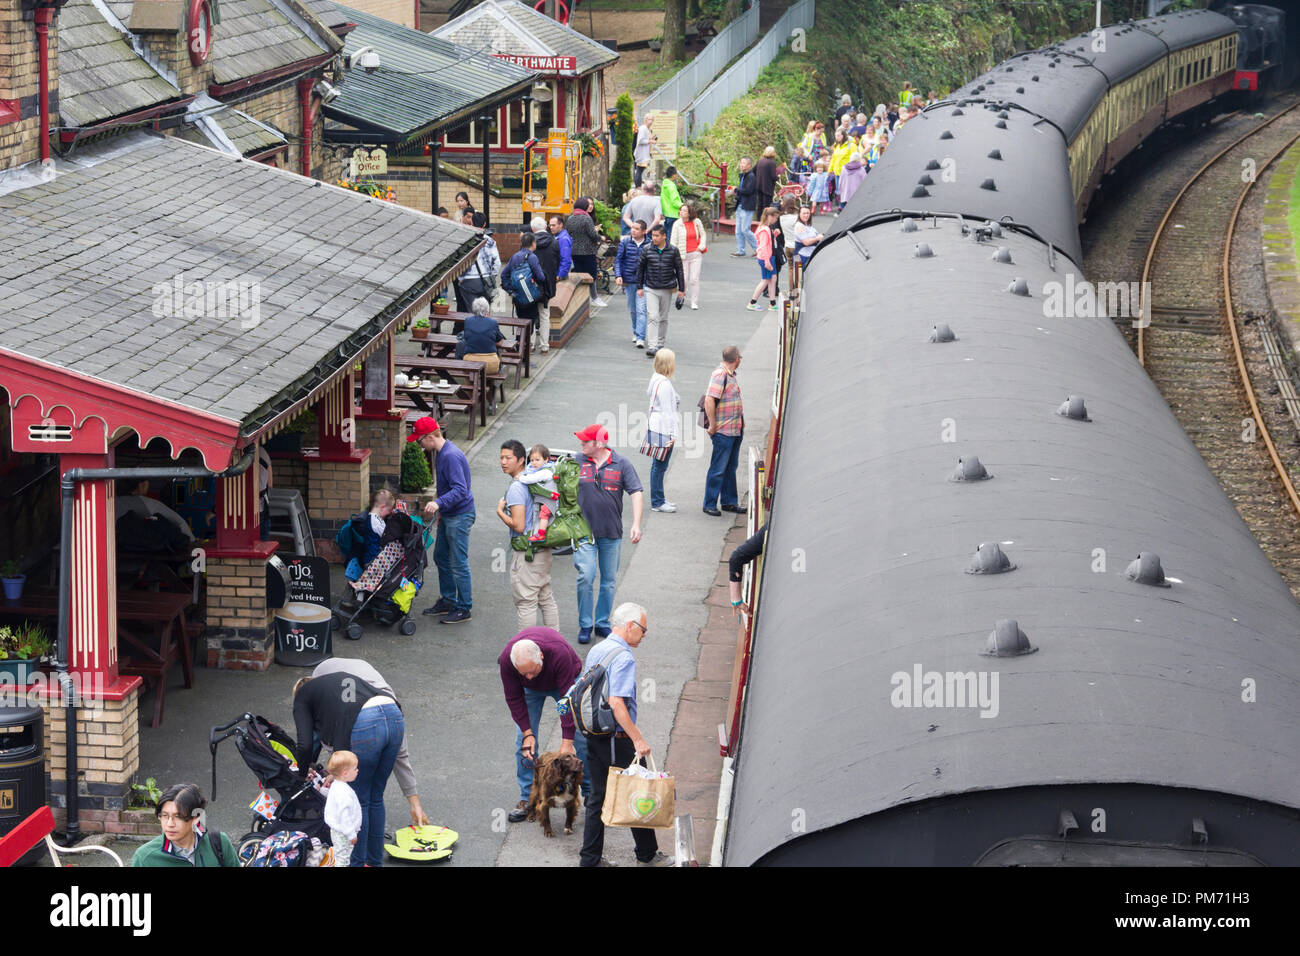 Busy train station platform at Haverthwaite preserved heritage railway in the Lake District as passengers disembark from the newly arrived train. Stock Photo